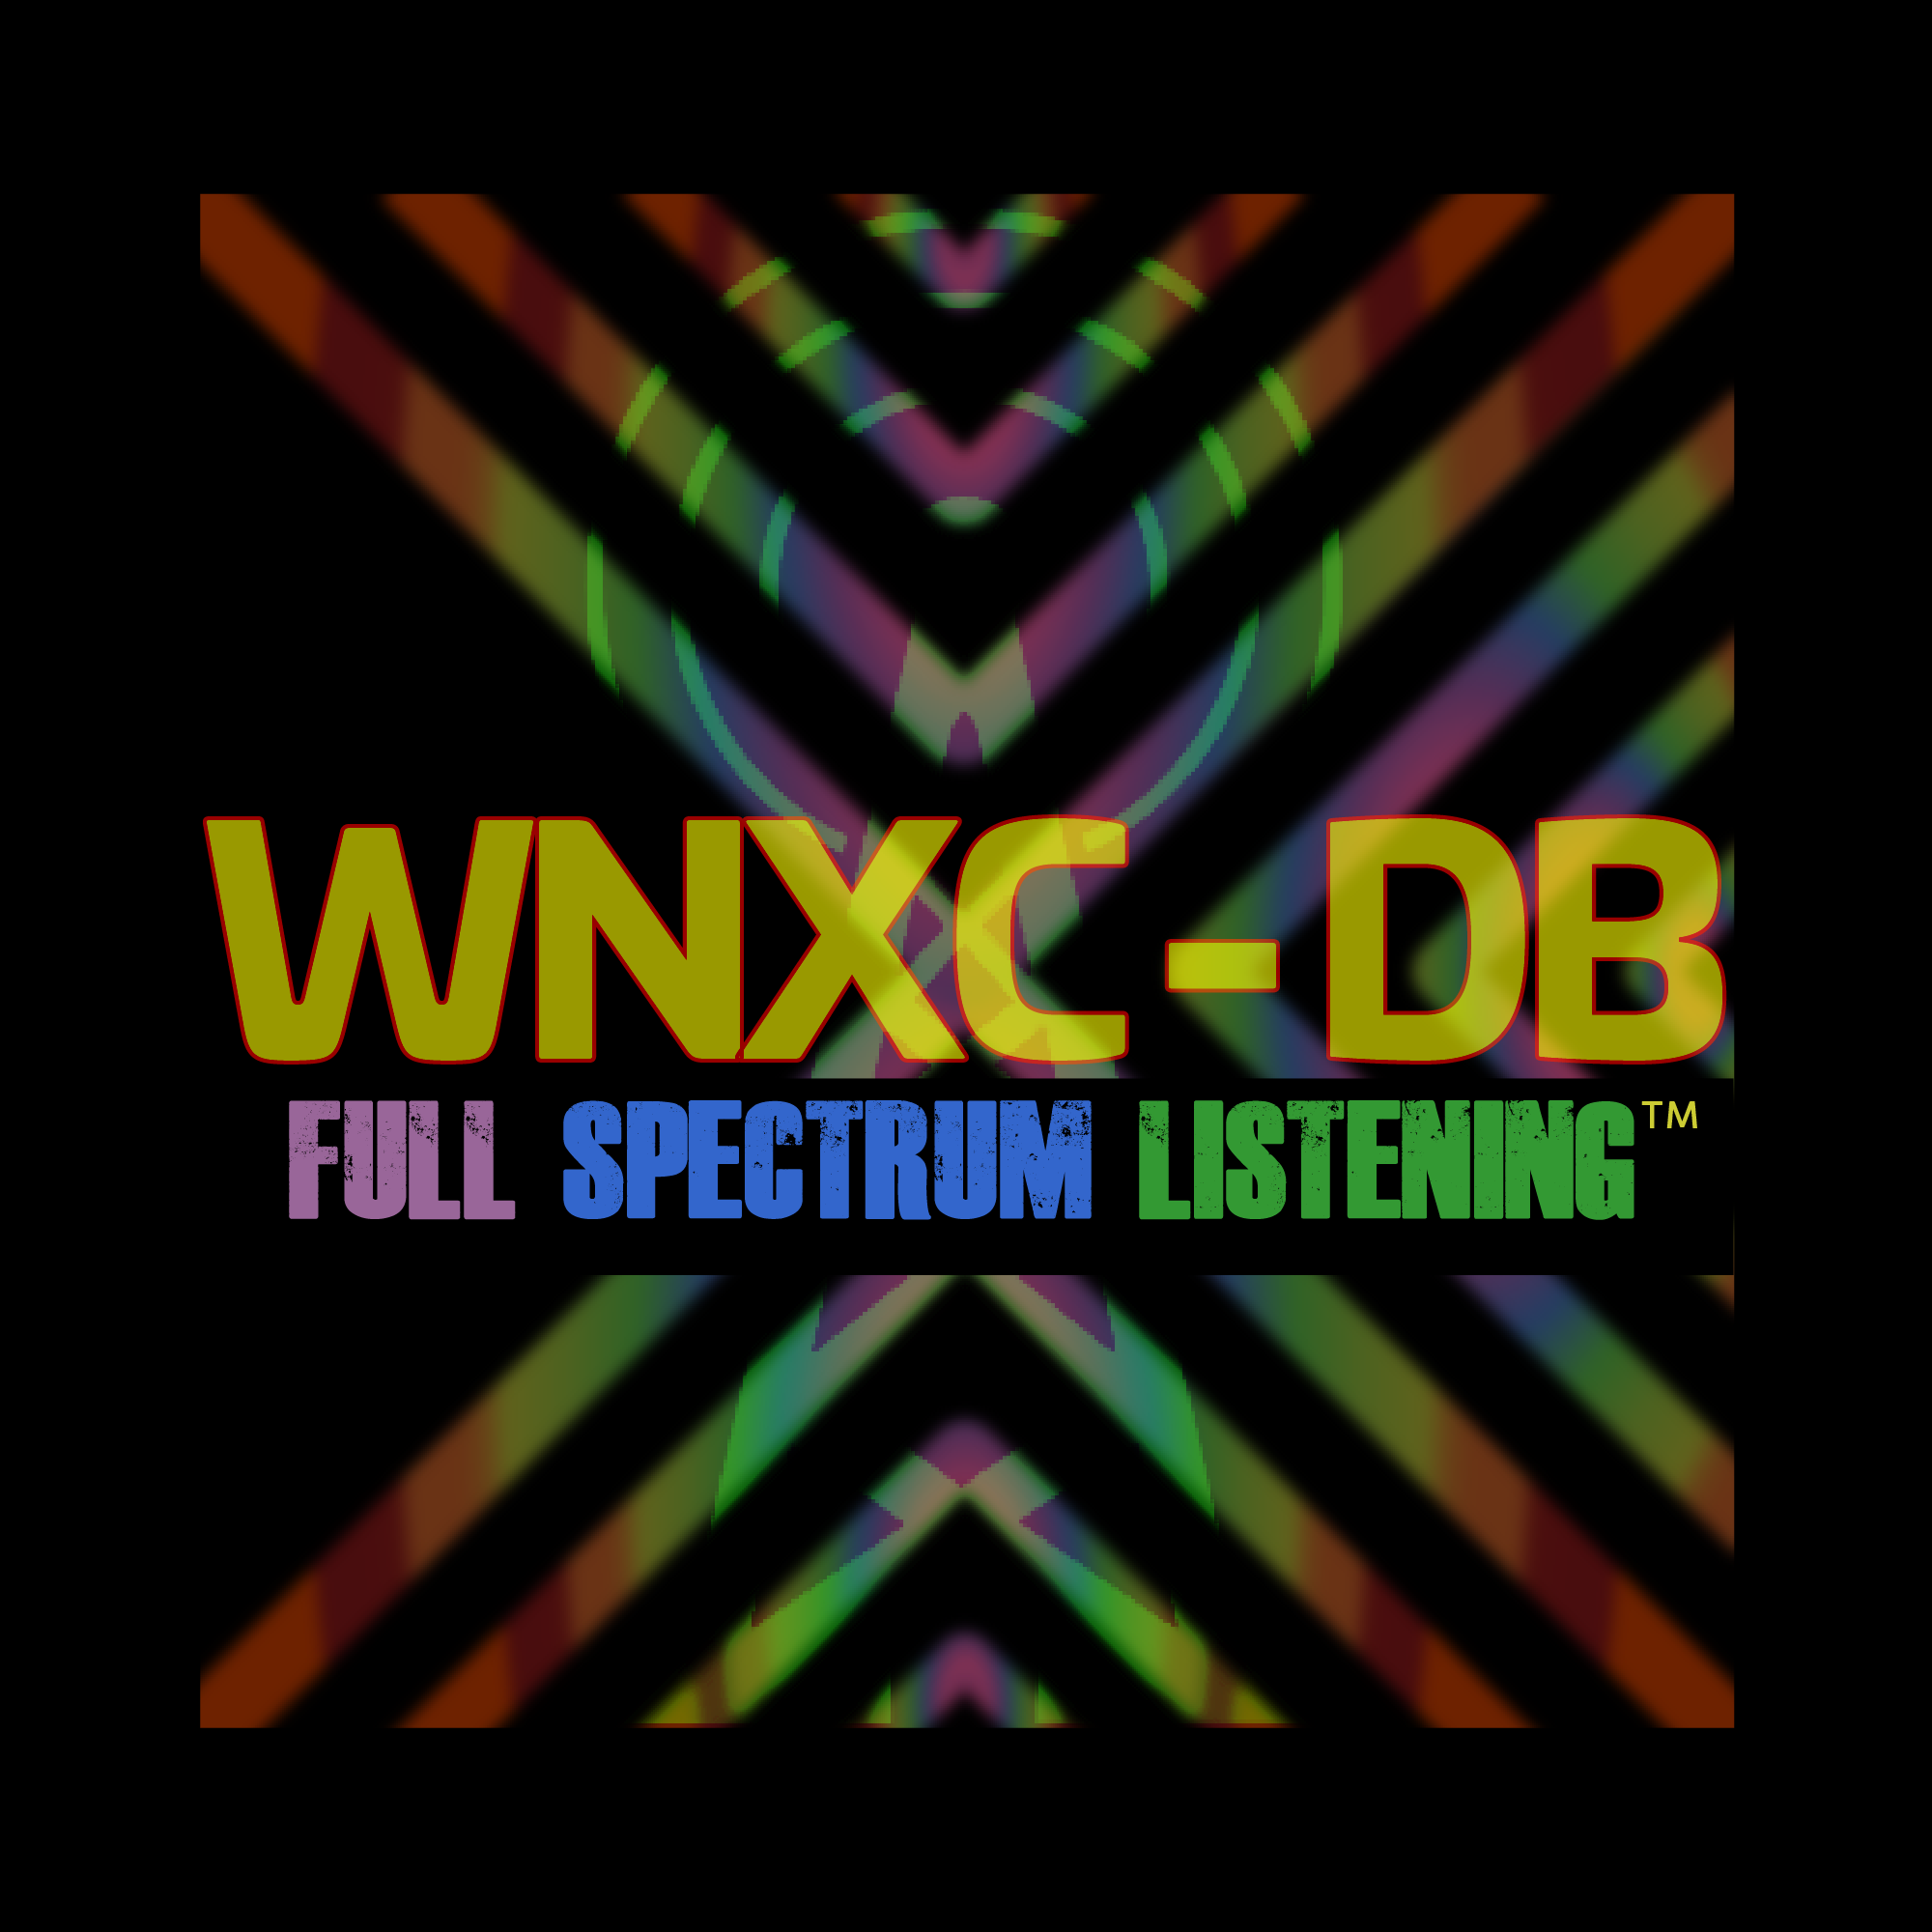 Art for The Prism: Music News Curated by WNXC by WNXC: Full Spectrum Listening